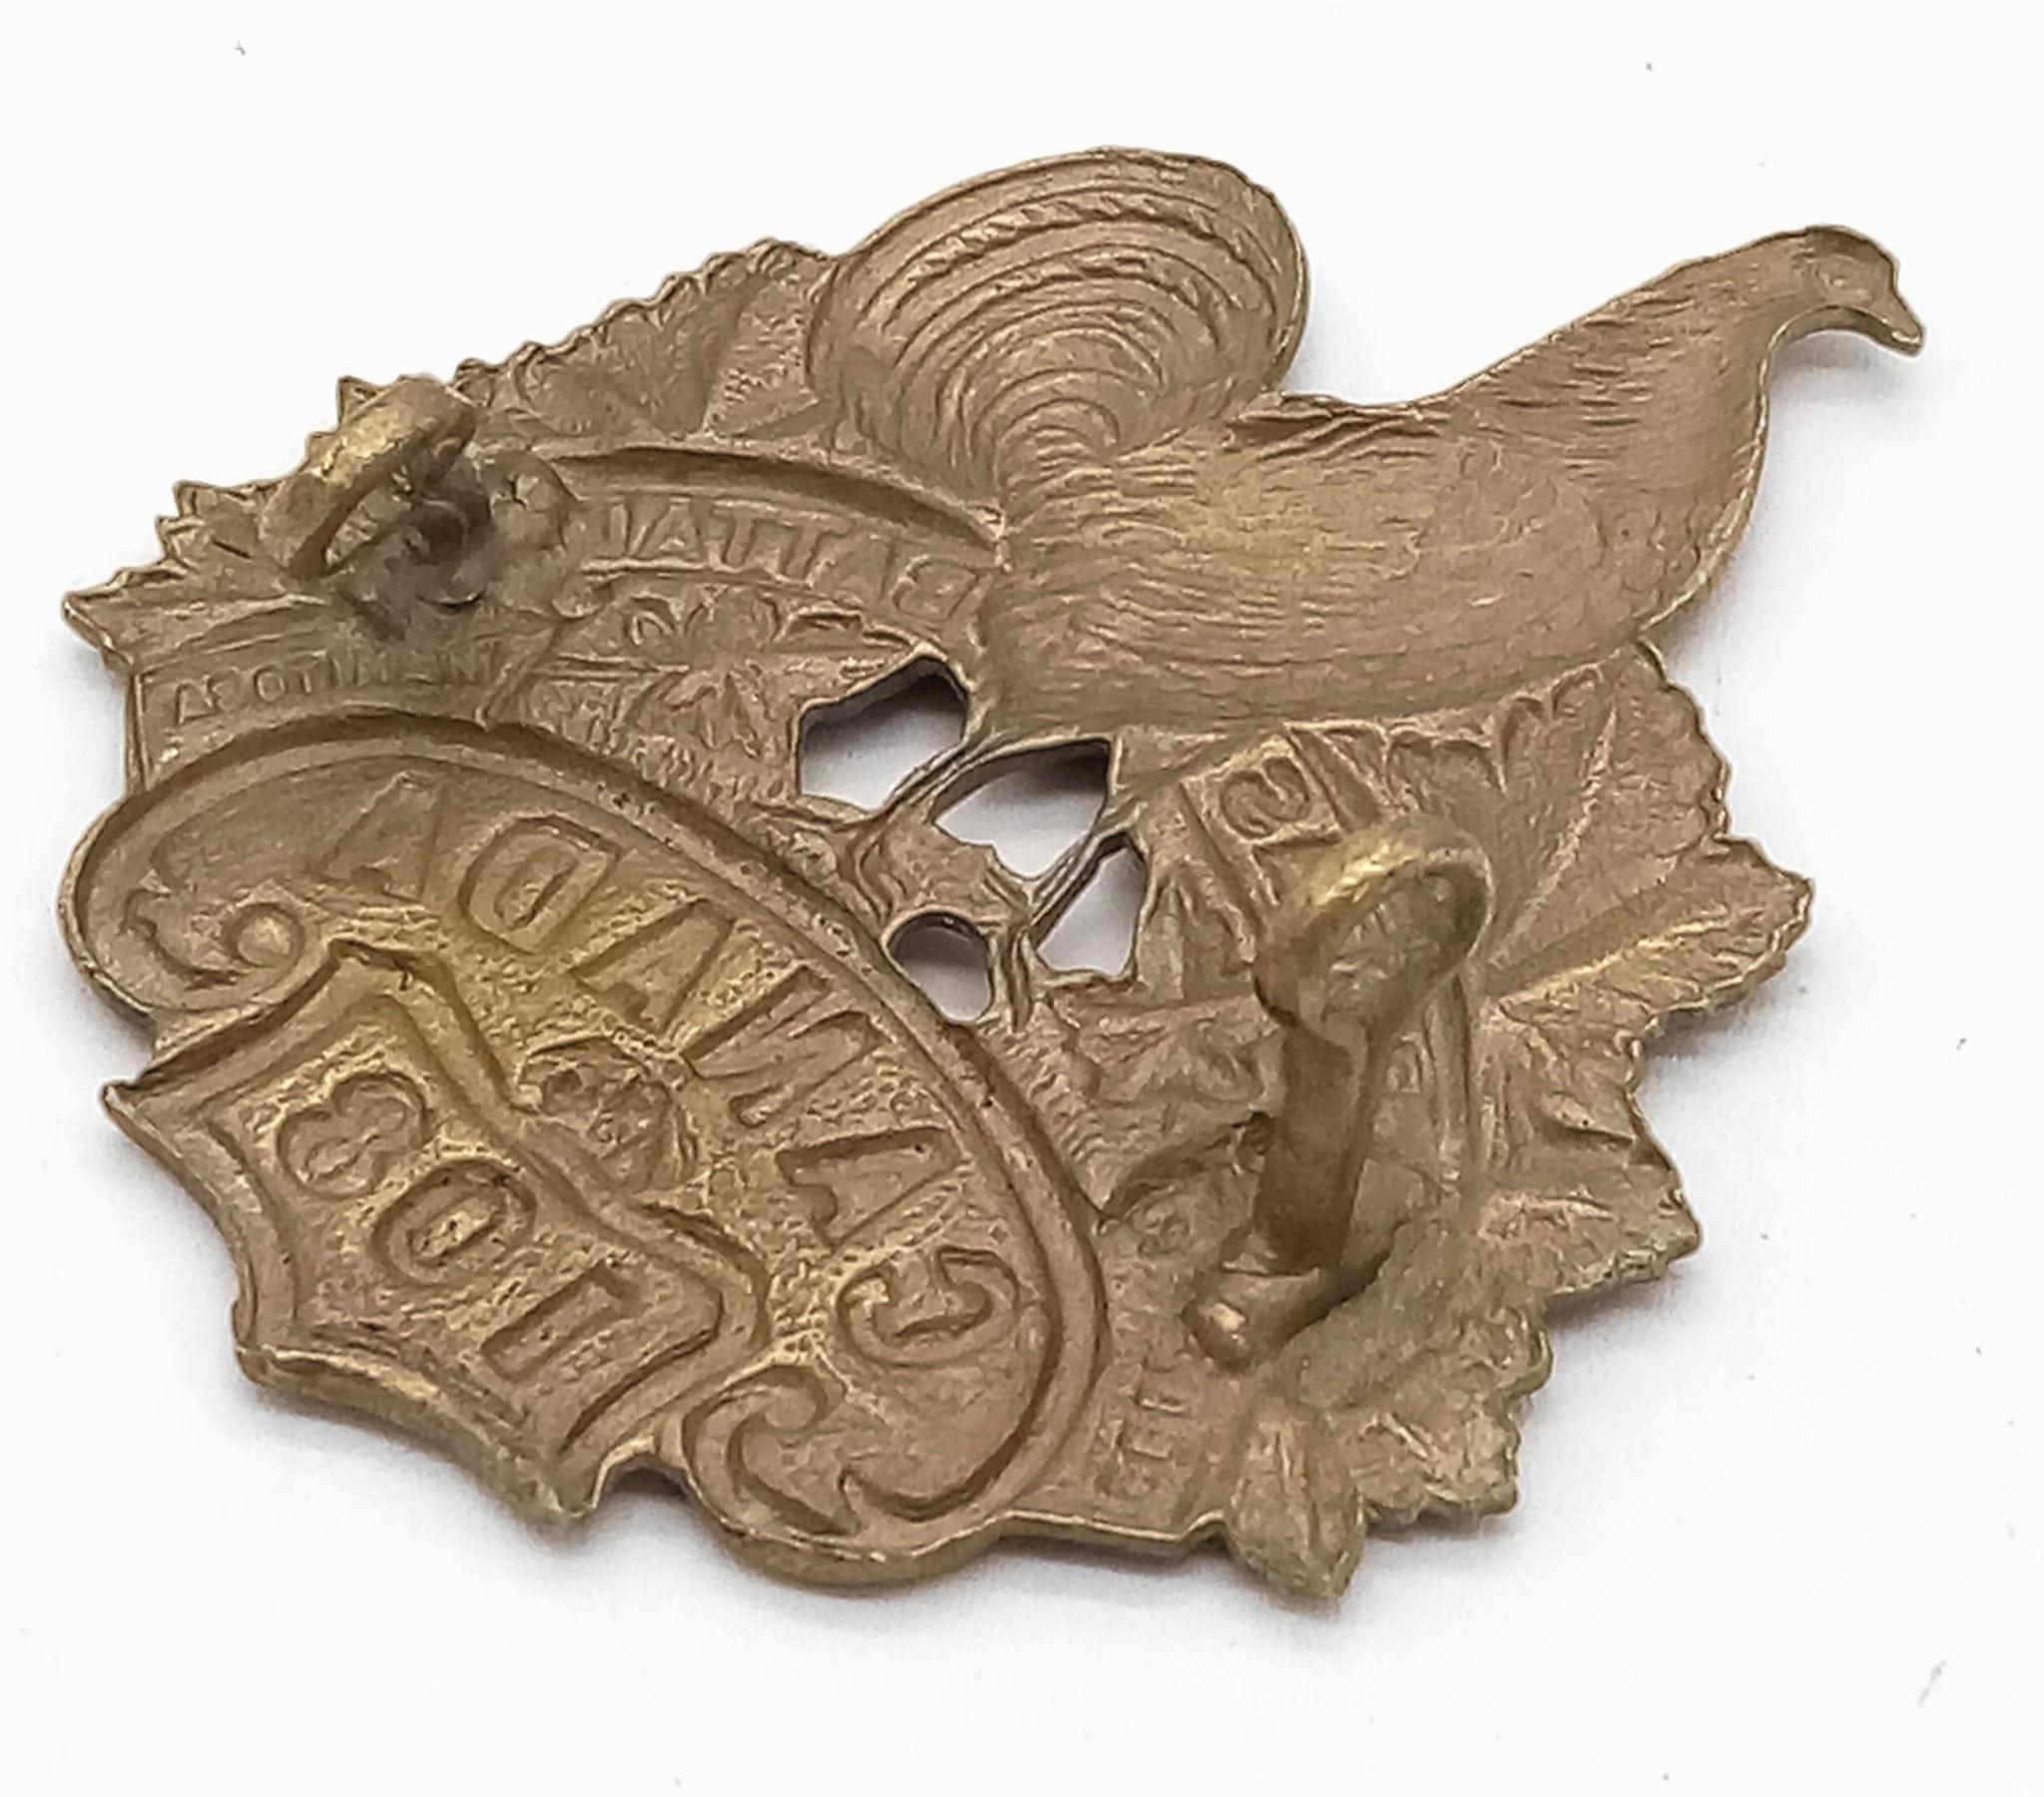 WW1 Canadian Expeditionary Force Cap Badge. 108th Selkirk/Manitoba Overseas Battalion Cap Badge. - Image 2 of 2